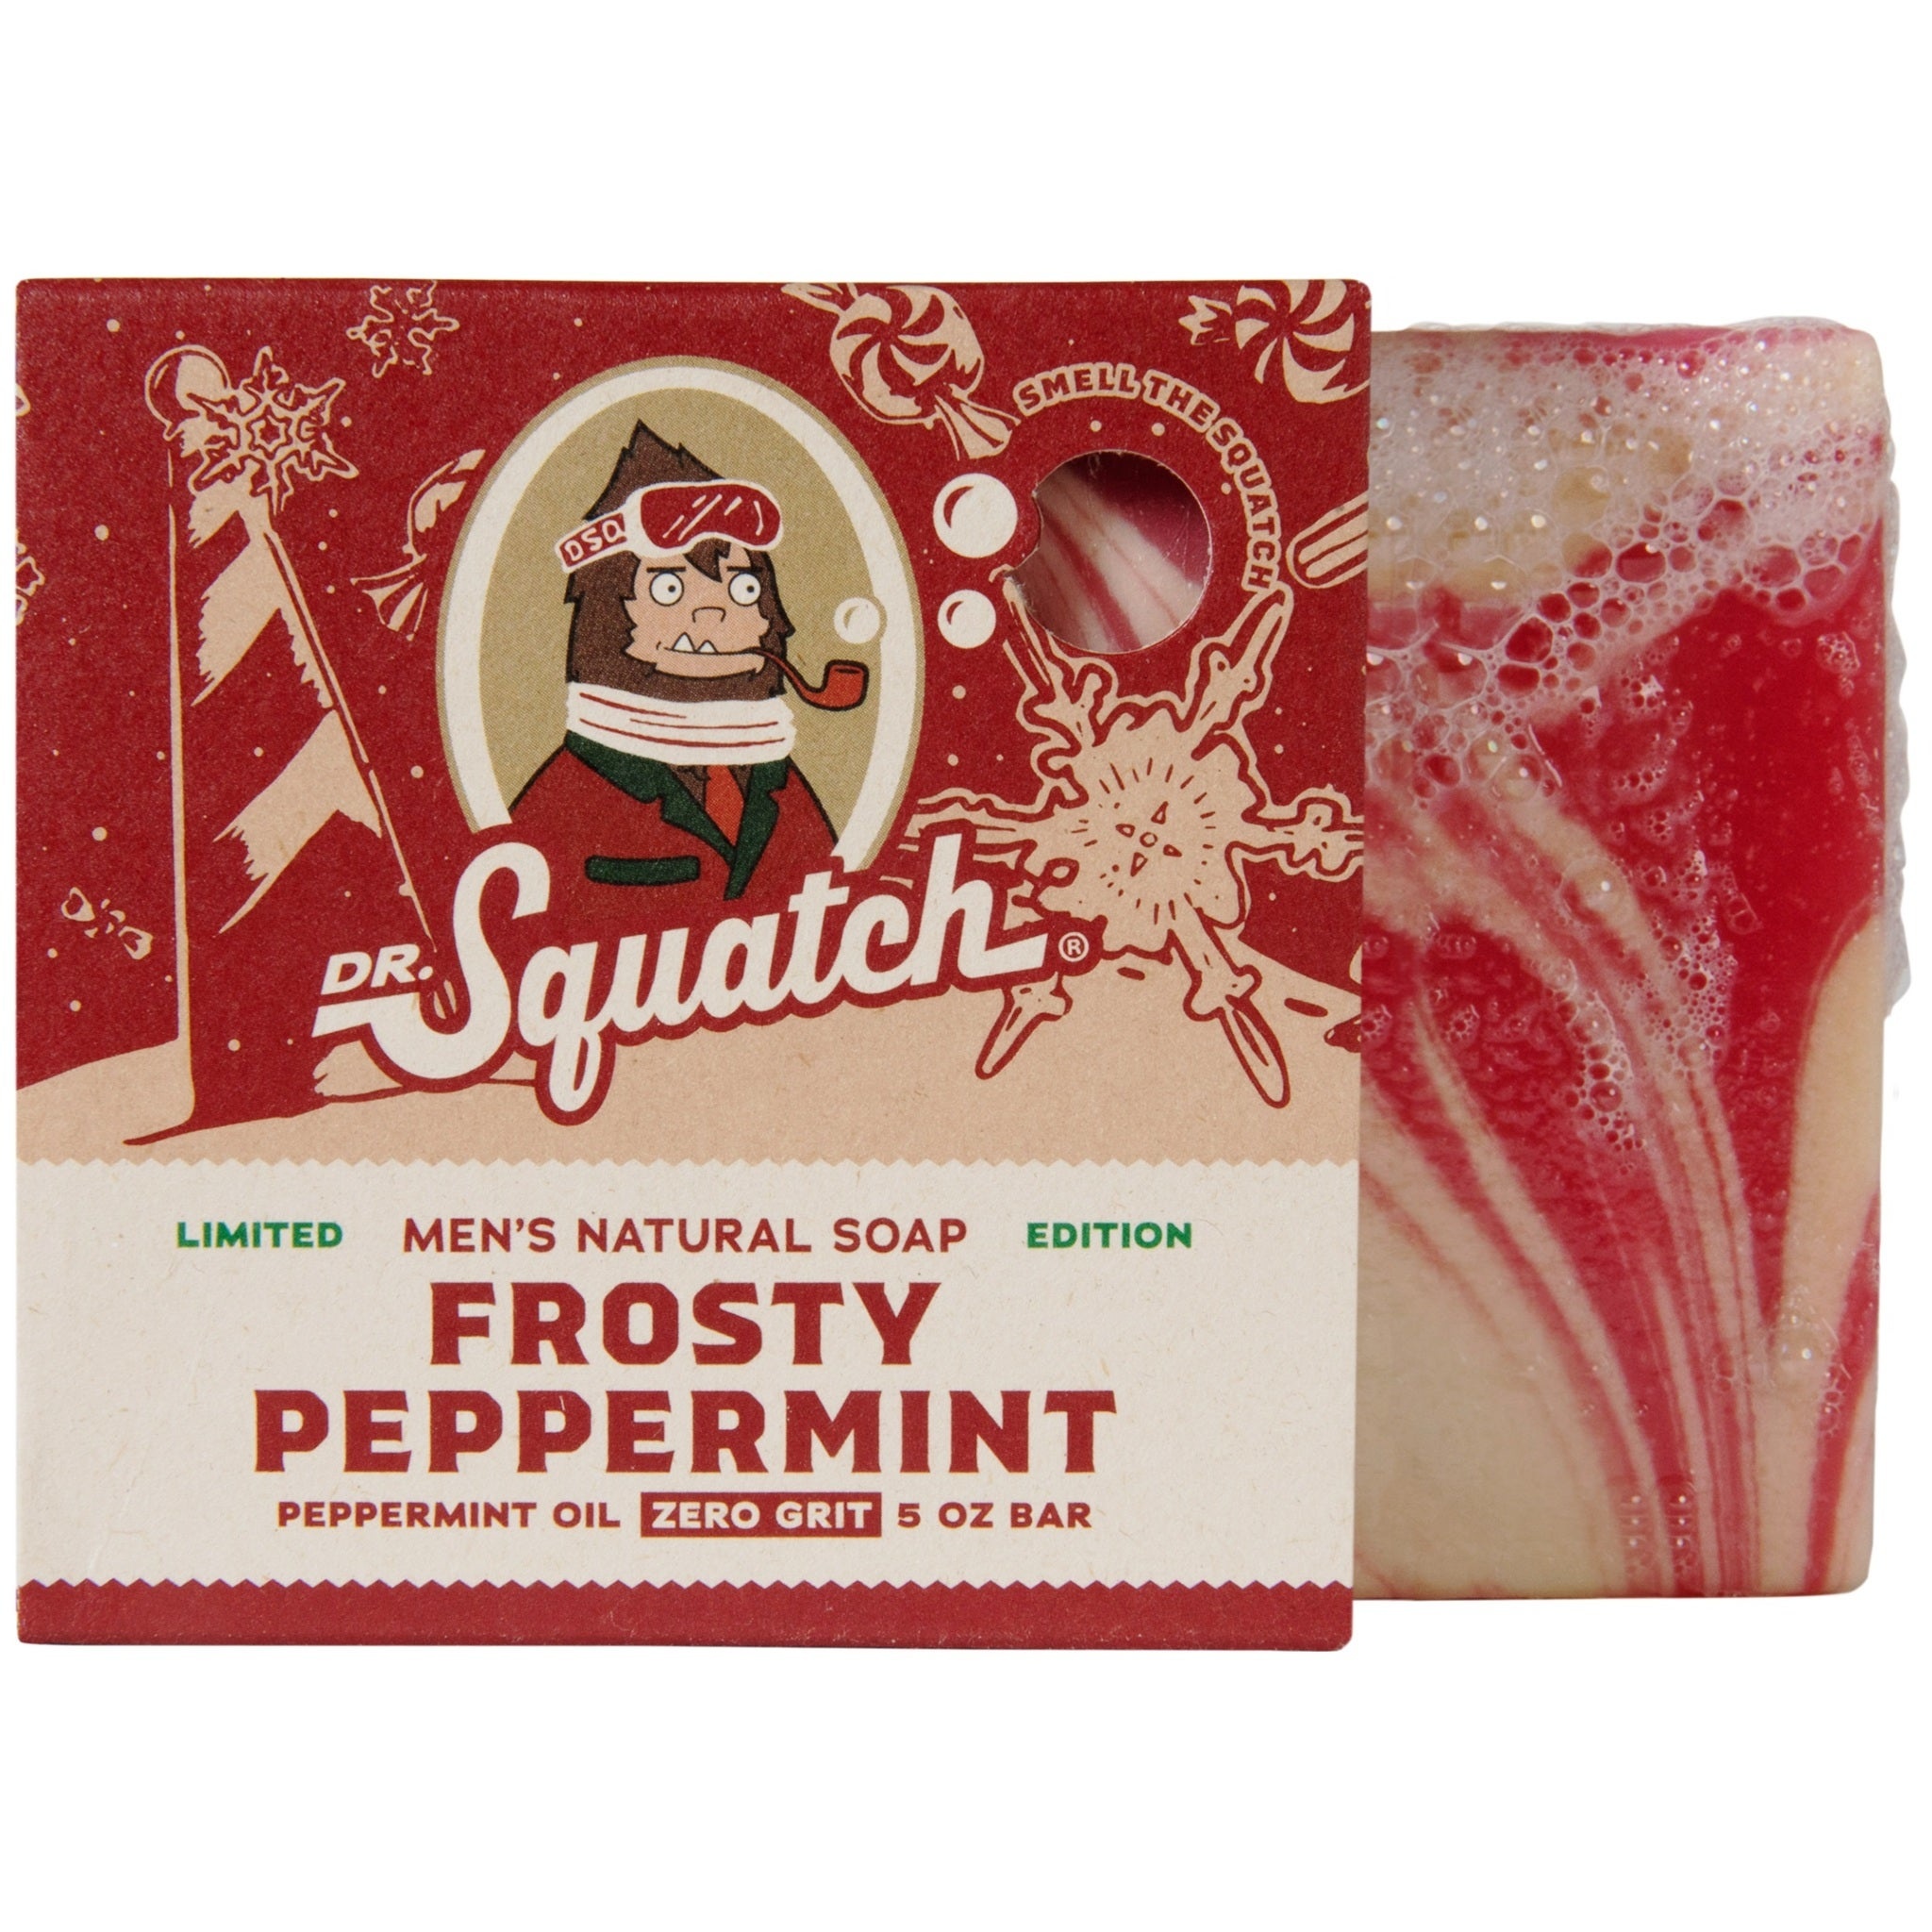 DR SQUATCH FROSTY PEPPERMINT BAR SOAP REVIEW - MINTY FRESH SOAP FOR MEN 